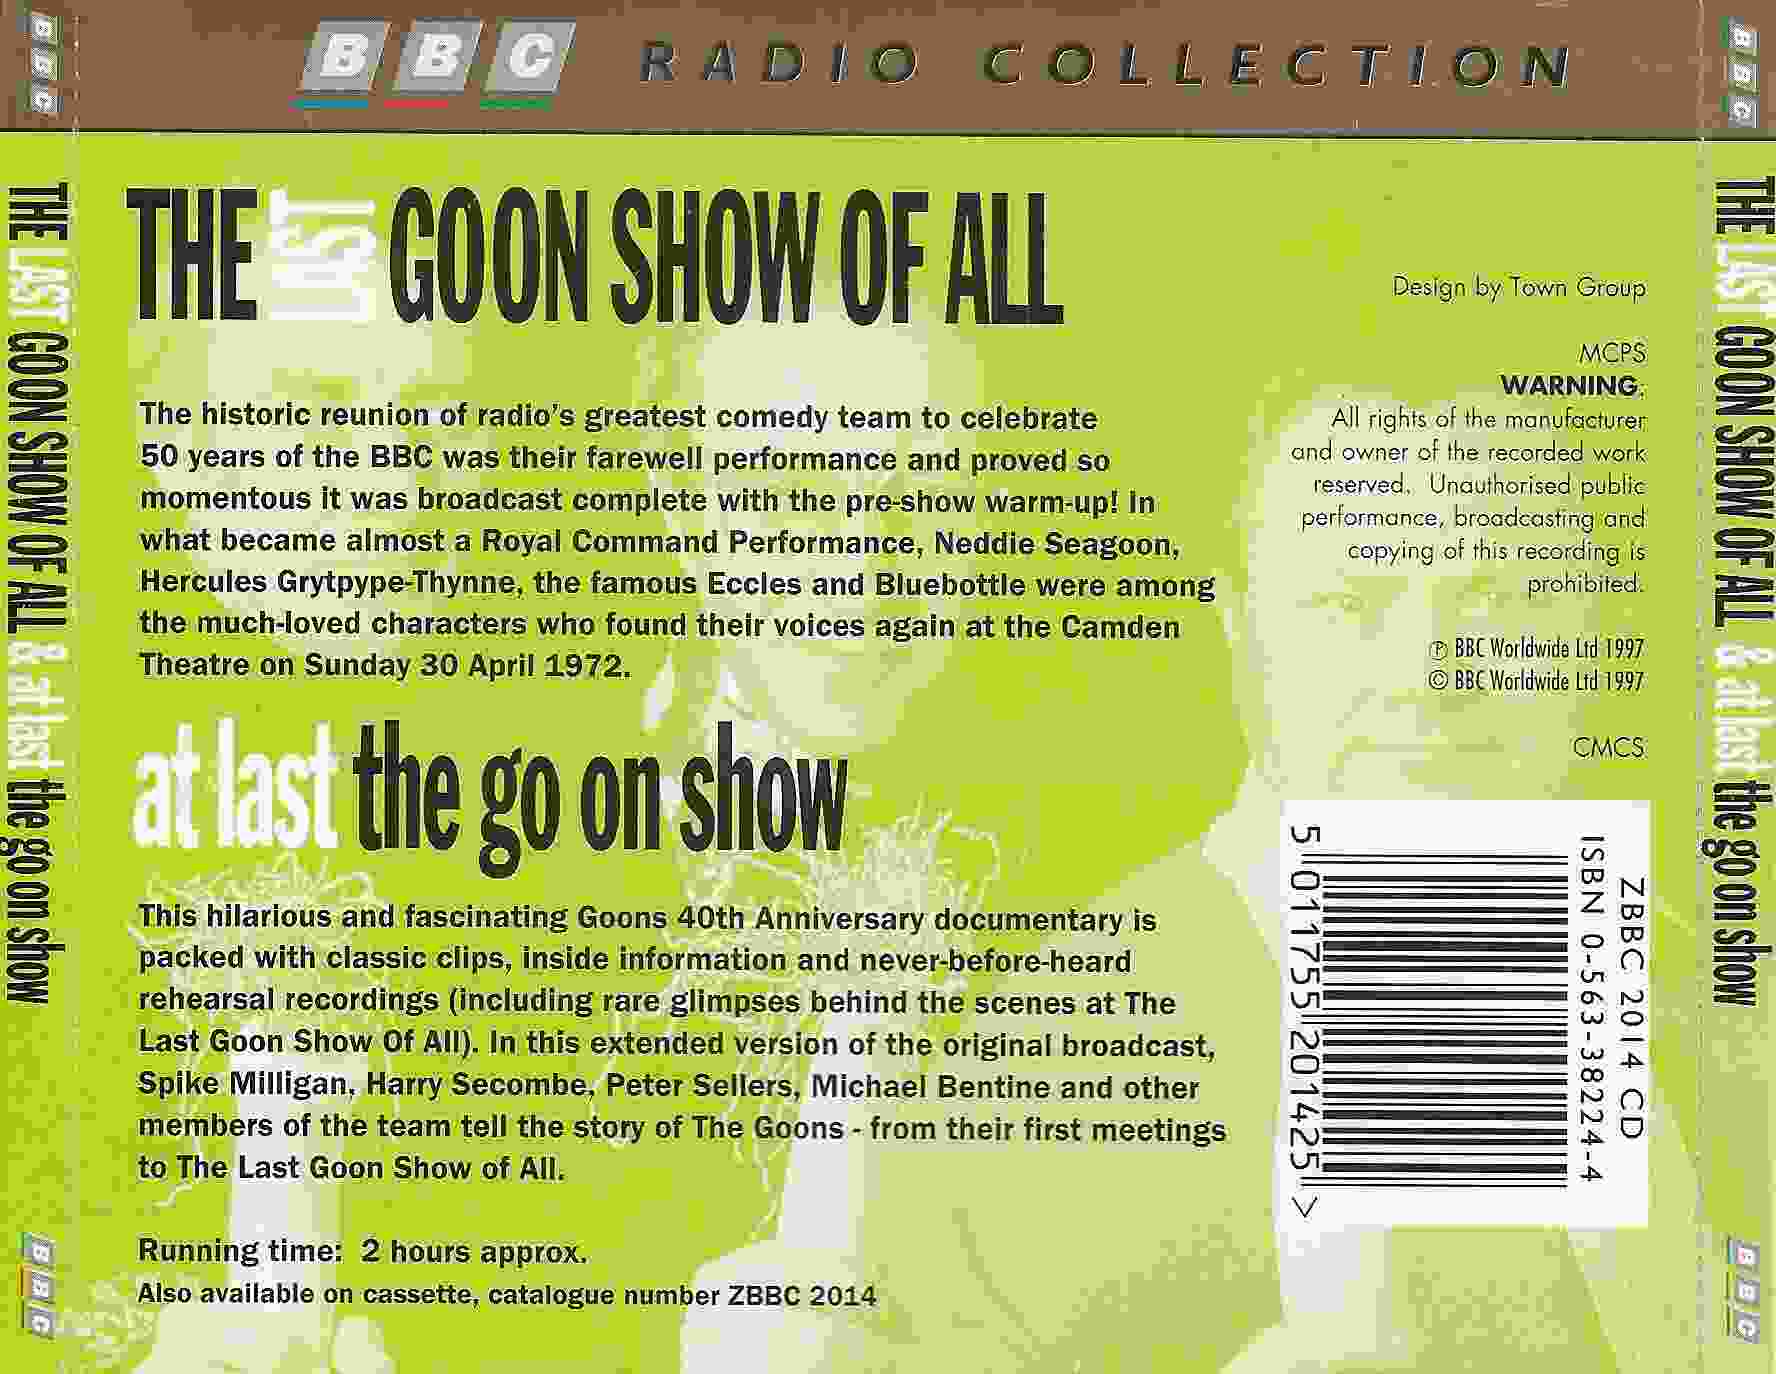 Picture of ZBBC 2014 CD The last goon show of all / At last the go on show by artist Spike Milligan from the BBC records and Tapes library